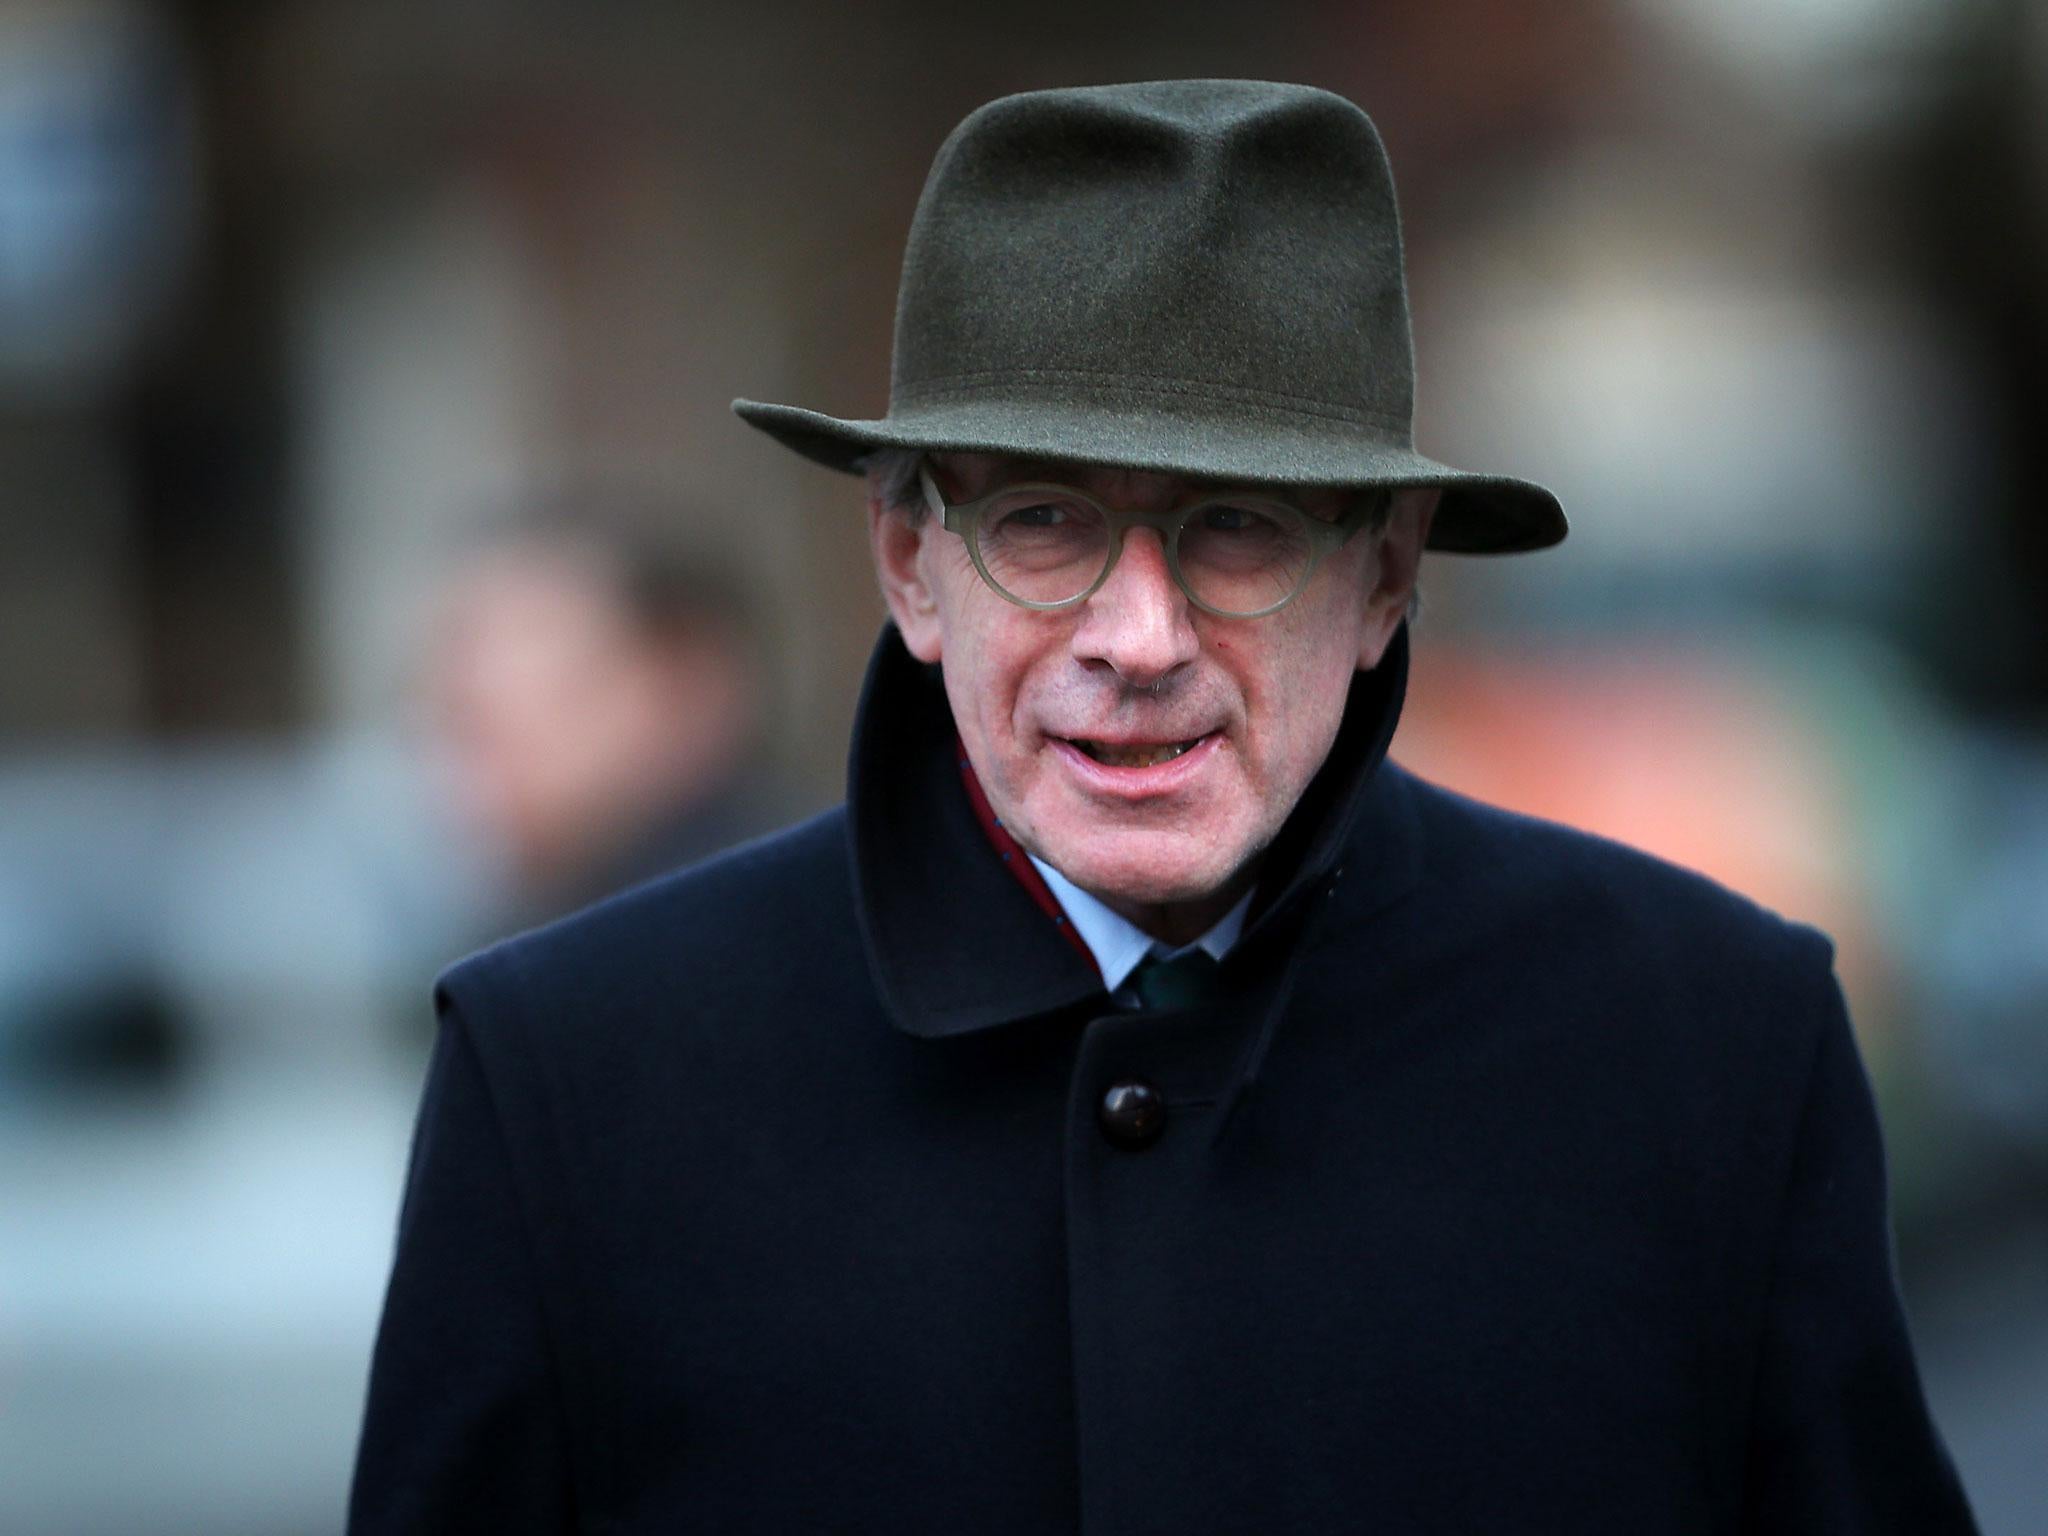 Sir Malcolm Rifkind leaves Parliament. Former Conservative Foreign Secretary Rifkin and Jack Straw, a former Foreign Secretary in the last Labour government have been caught in a Daily Telegraph and Channel Four sting apparently offering their services to